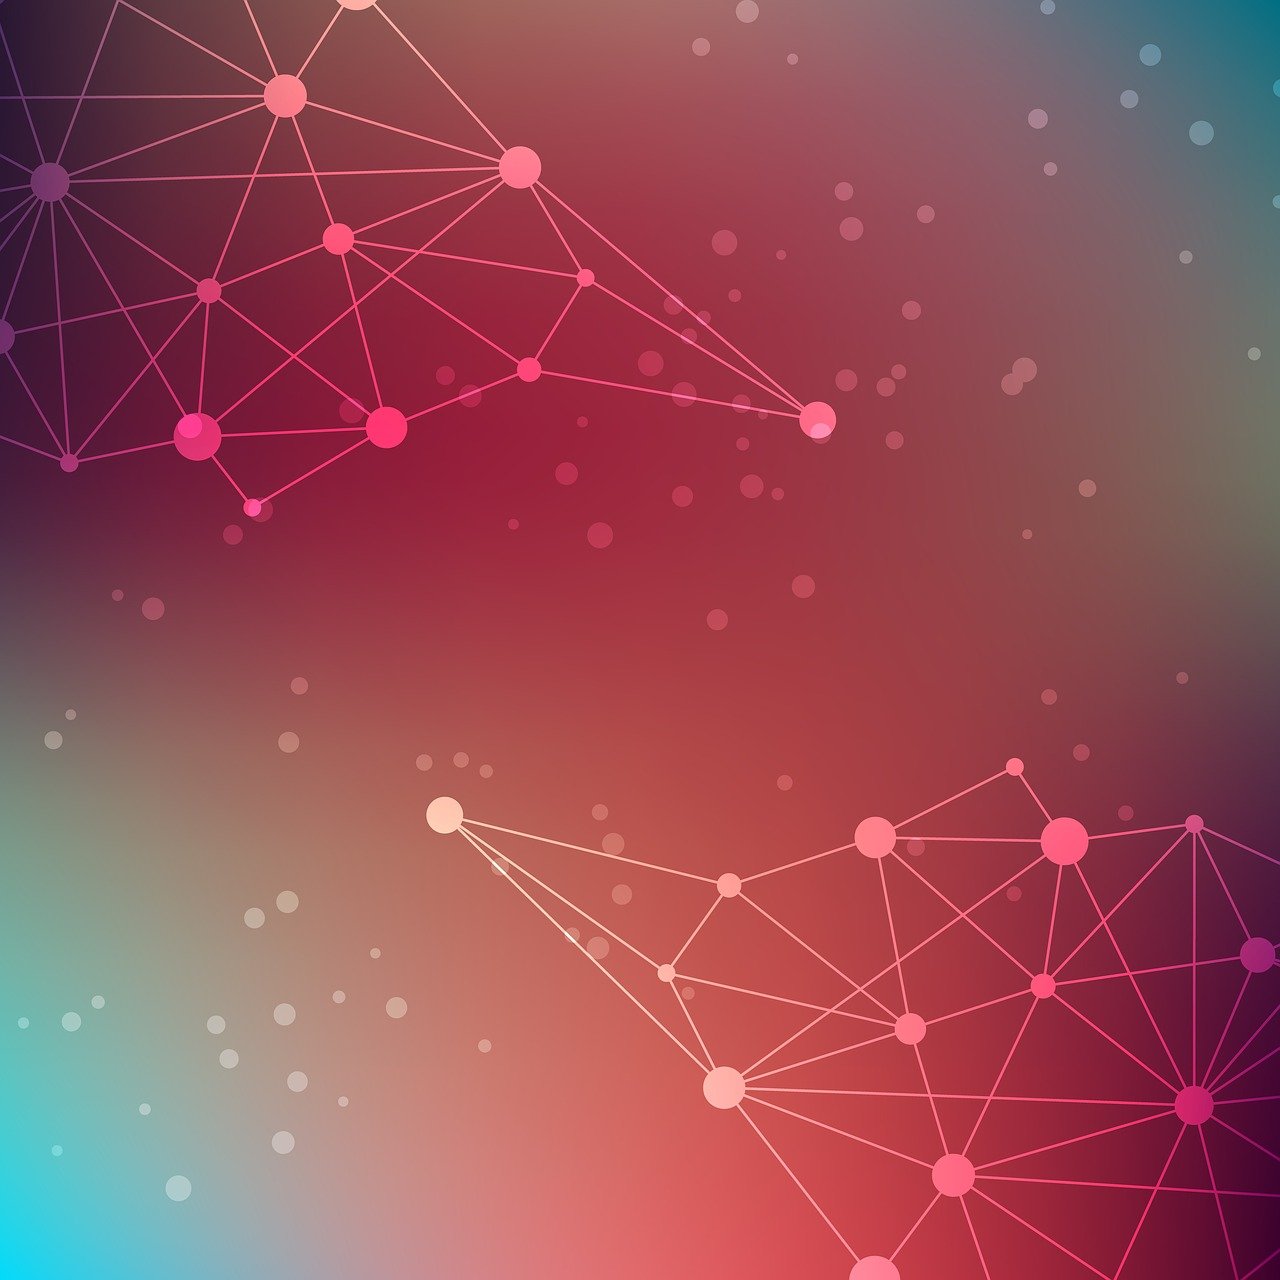 a colorful abstract background with dots and lines, shutterstock, futurism, crimson gradient, low polygons illustration